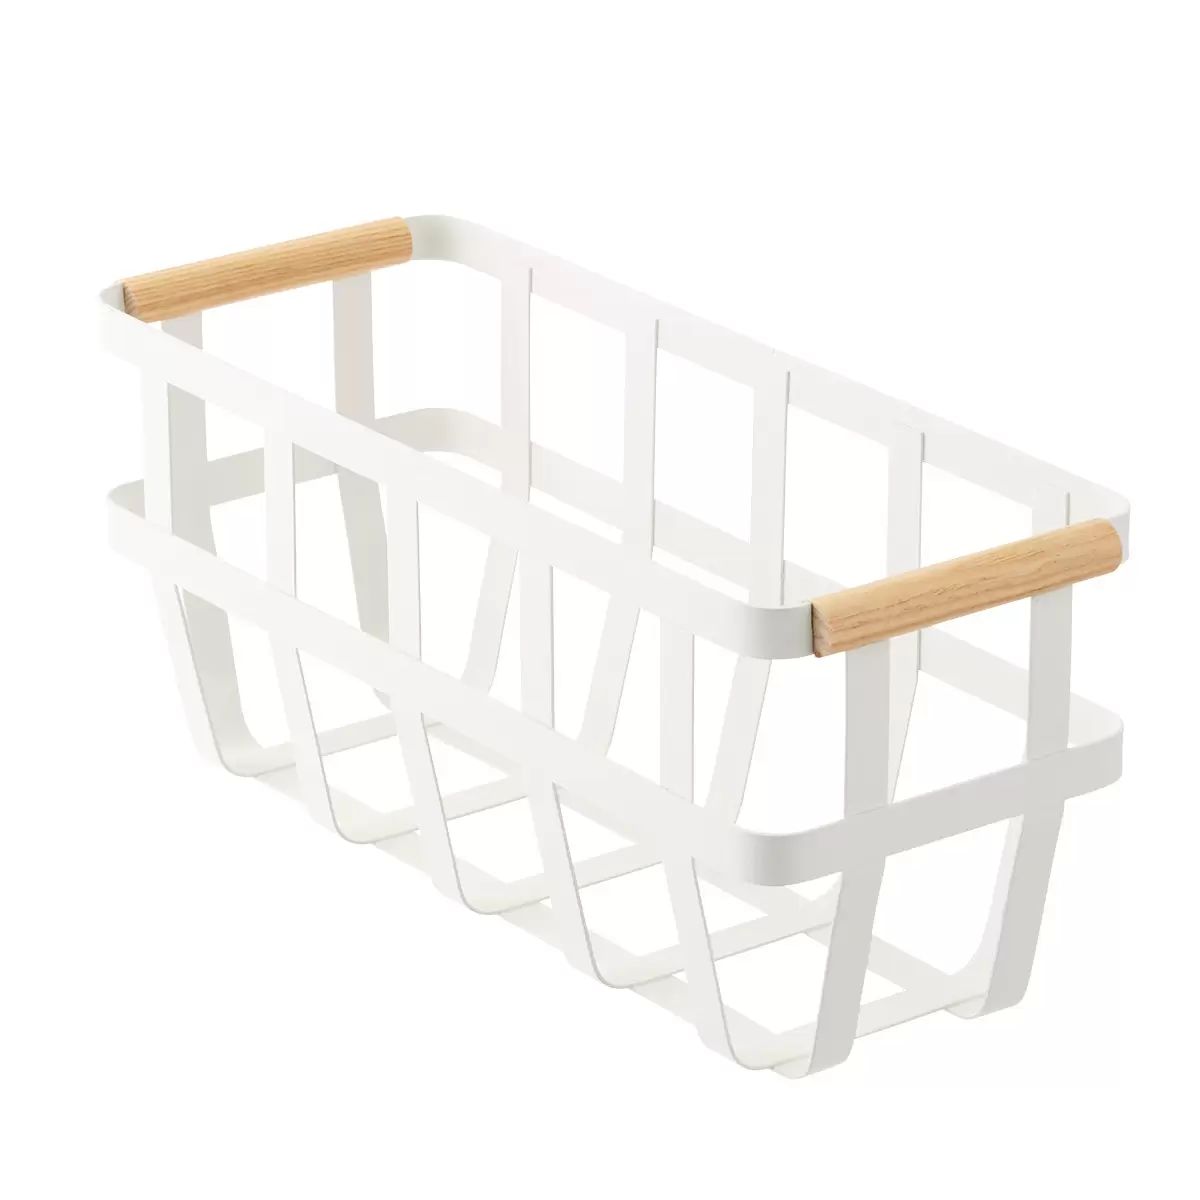 Yamazaki Slim Tosca Basket w/ Wooden Handles White/Natural | The Container Store